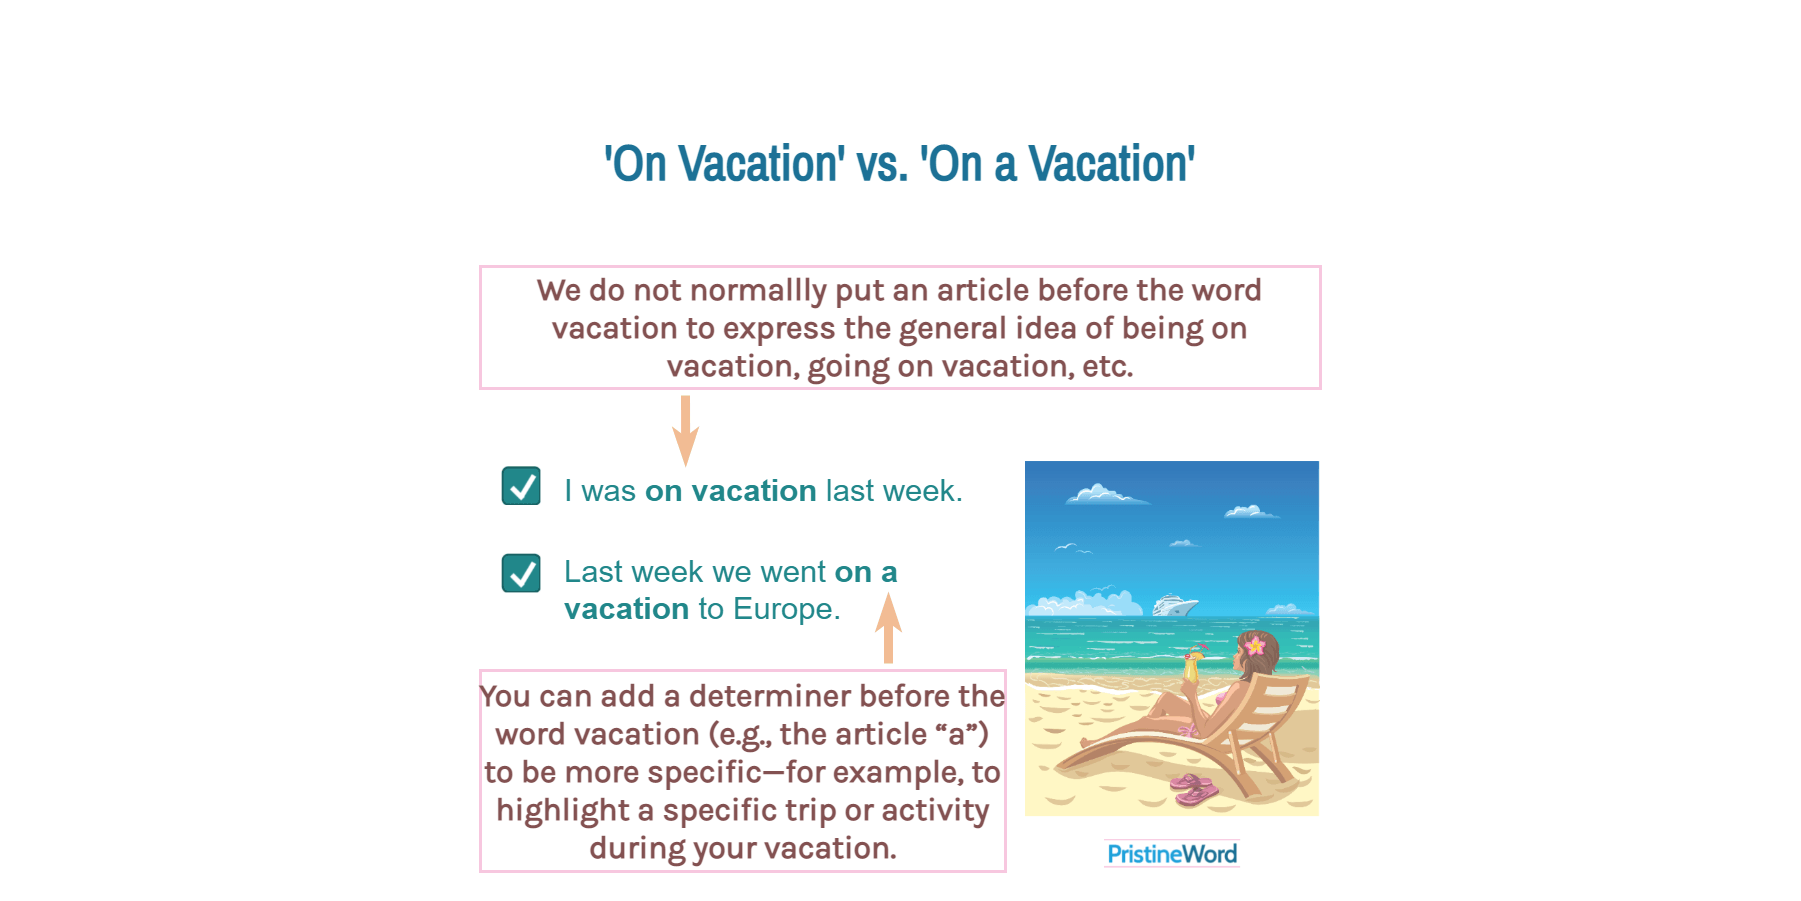 on-vacation-or-on-a-vacation-which-is-correct